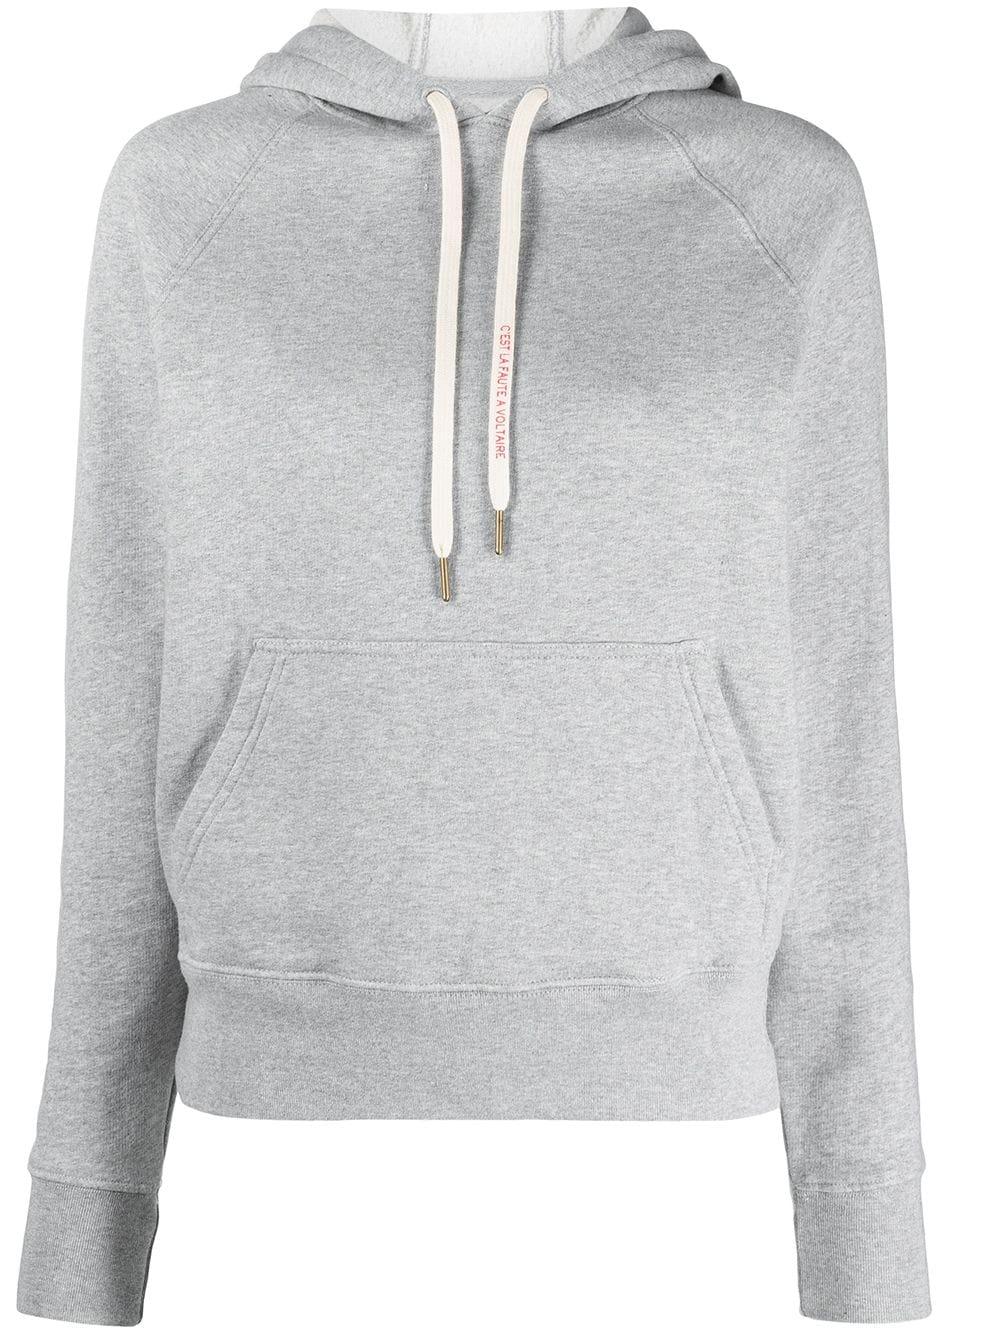 Zadig & Voltaire Band Of Sisters Hoodie in Gray | Lyst